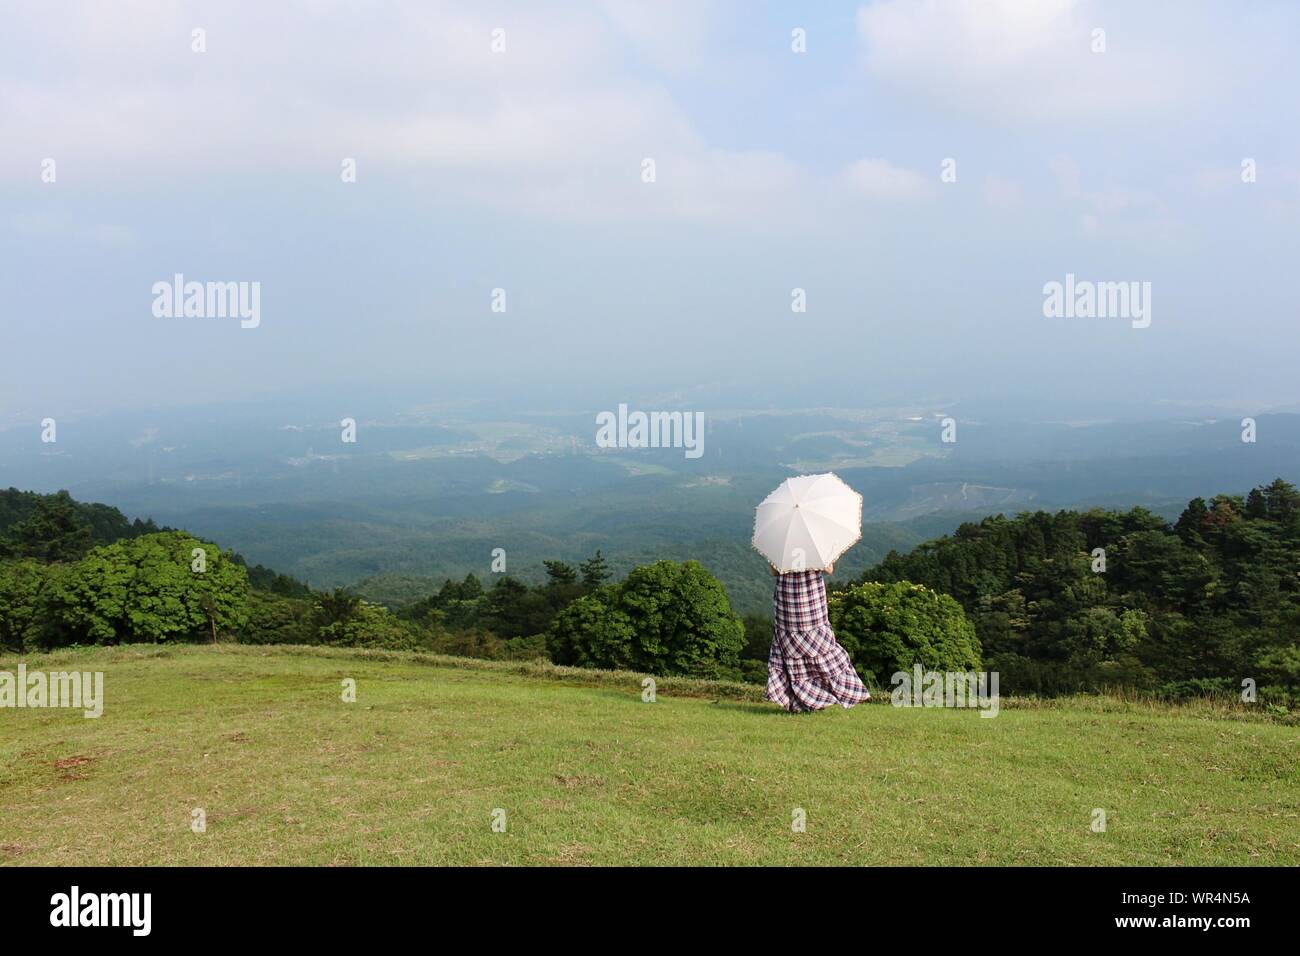 Rear View Of Woman Wearing Long Dress With Umbrella Standing On Grass Against Mountain Stock Photo